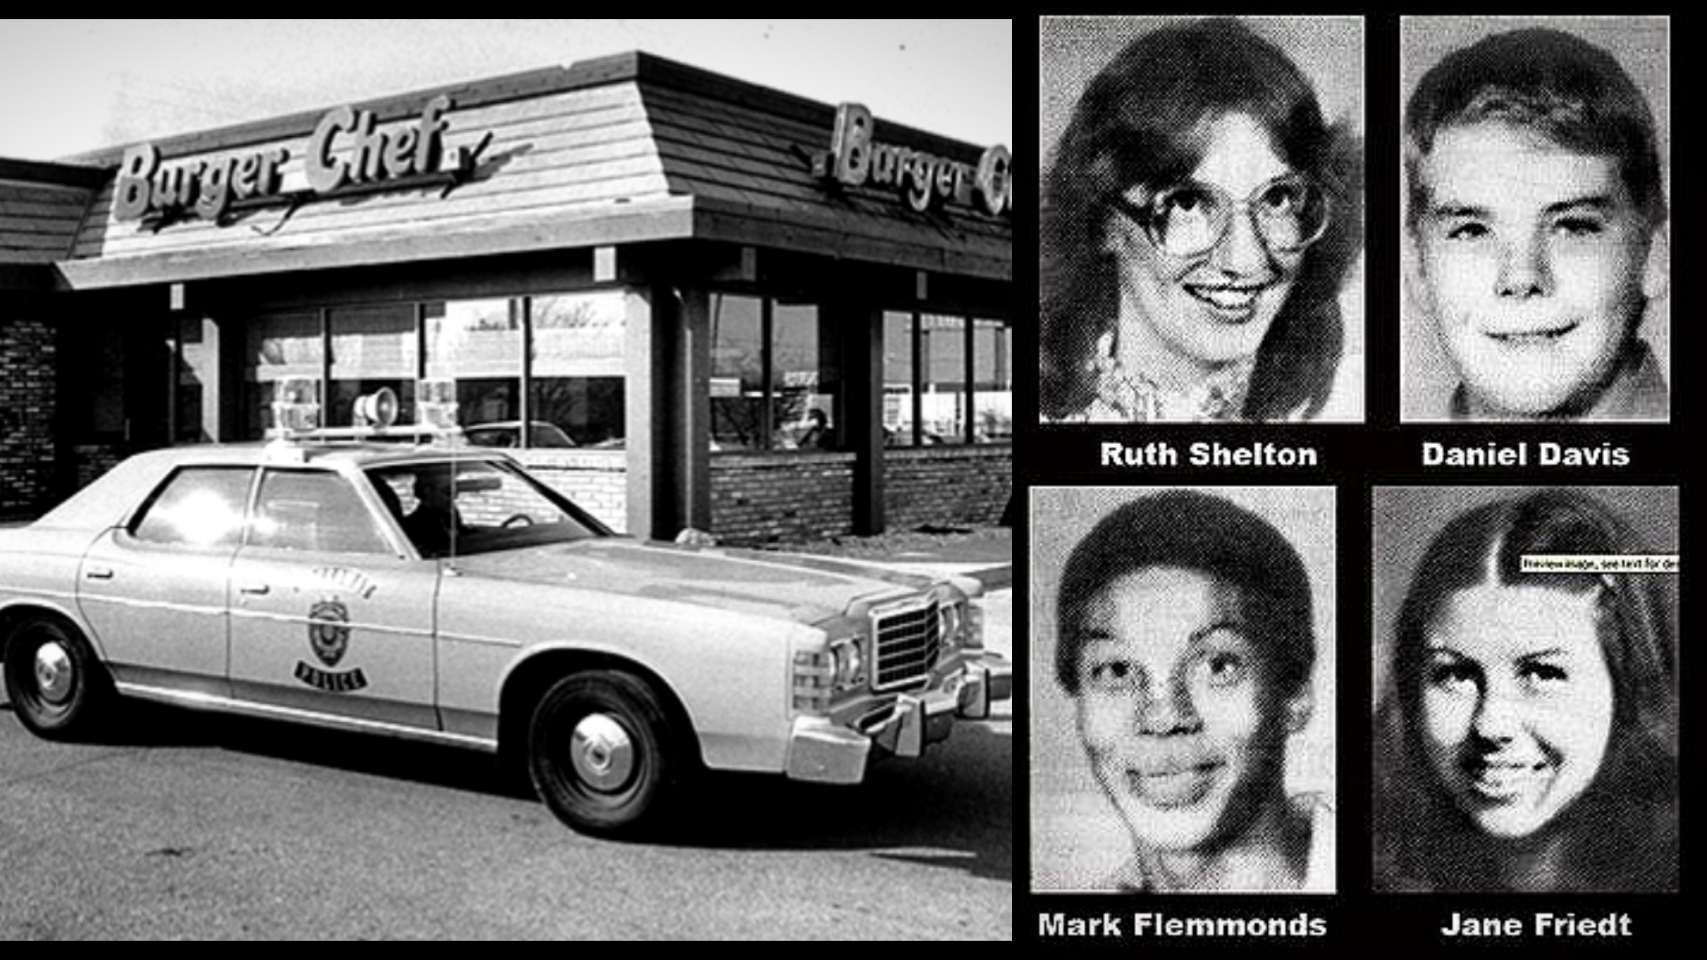 The Burger Chef Murders - Speedway, Indiana